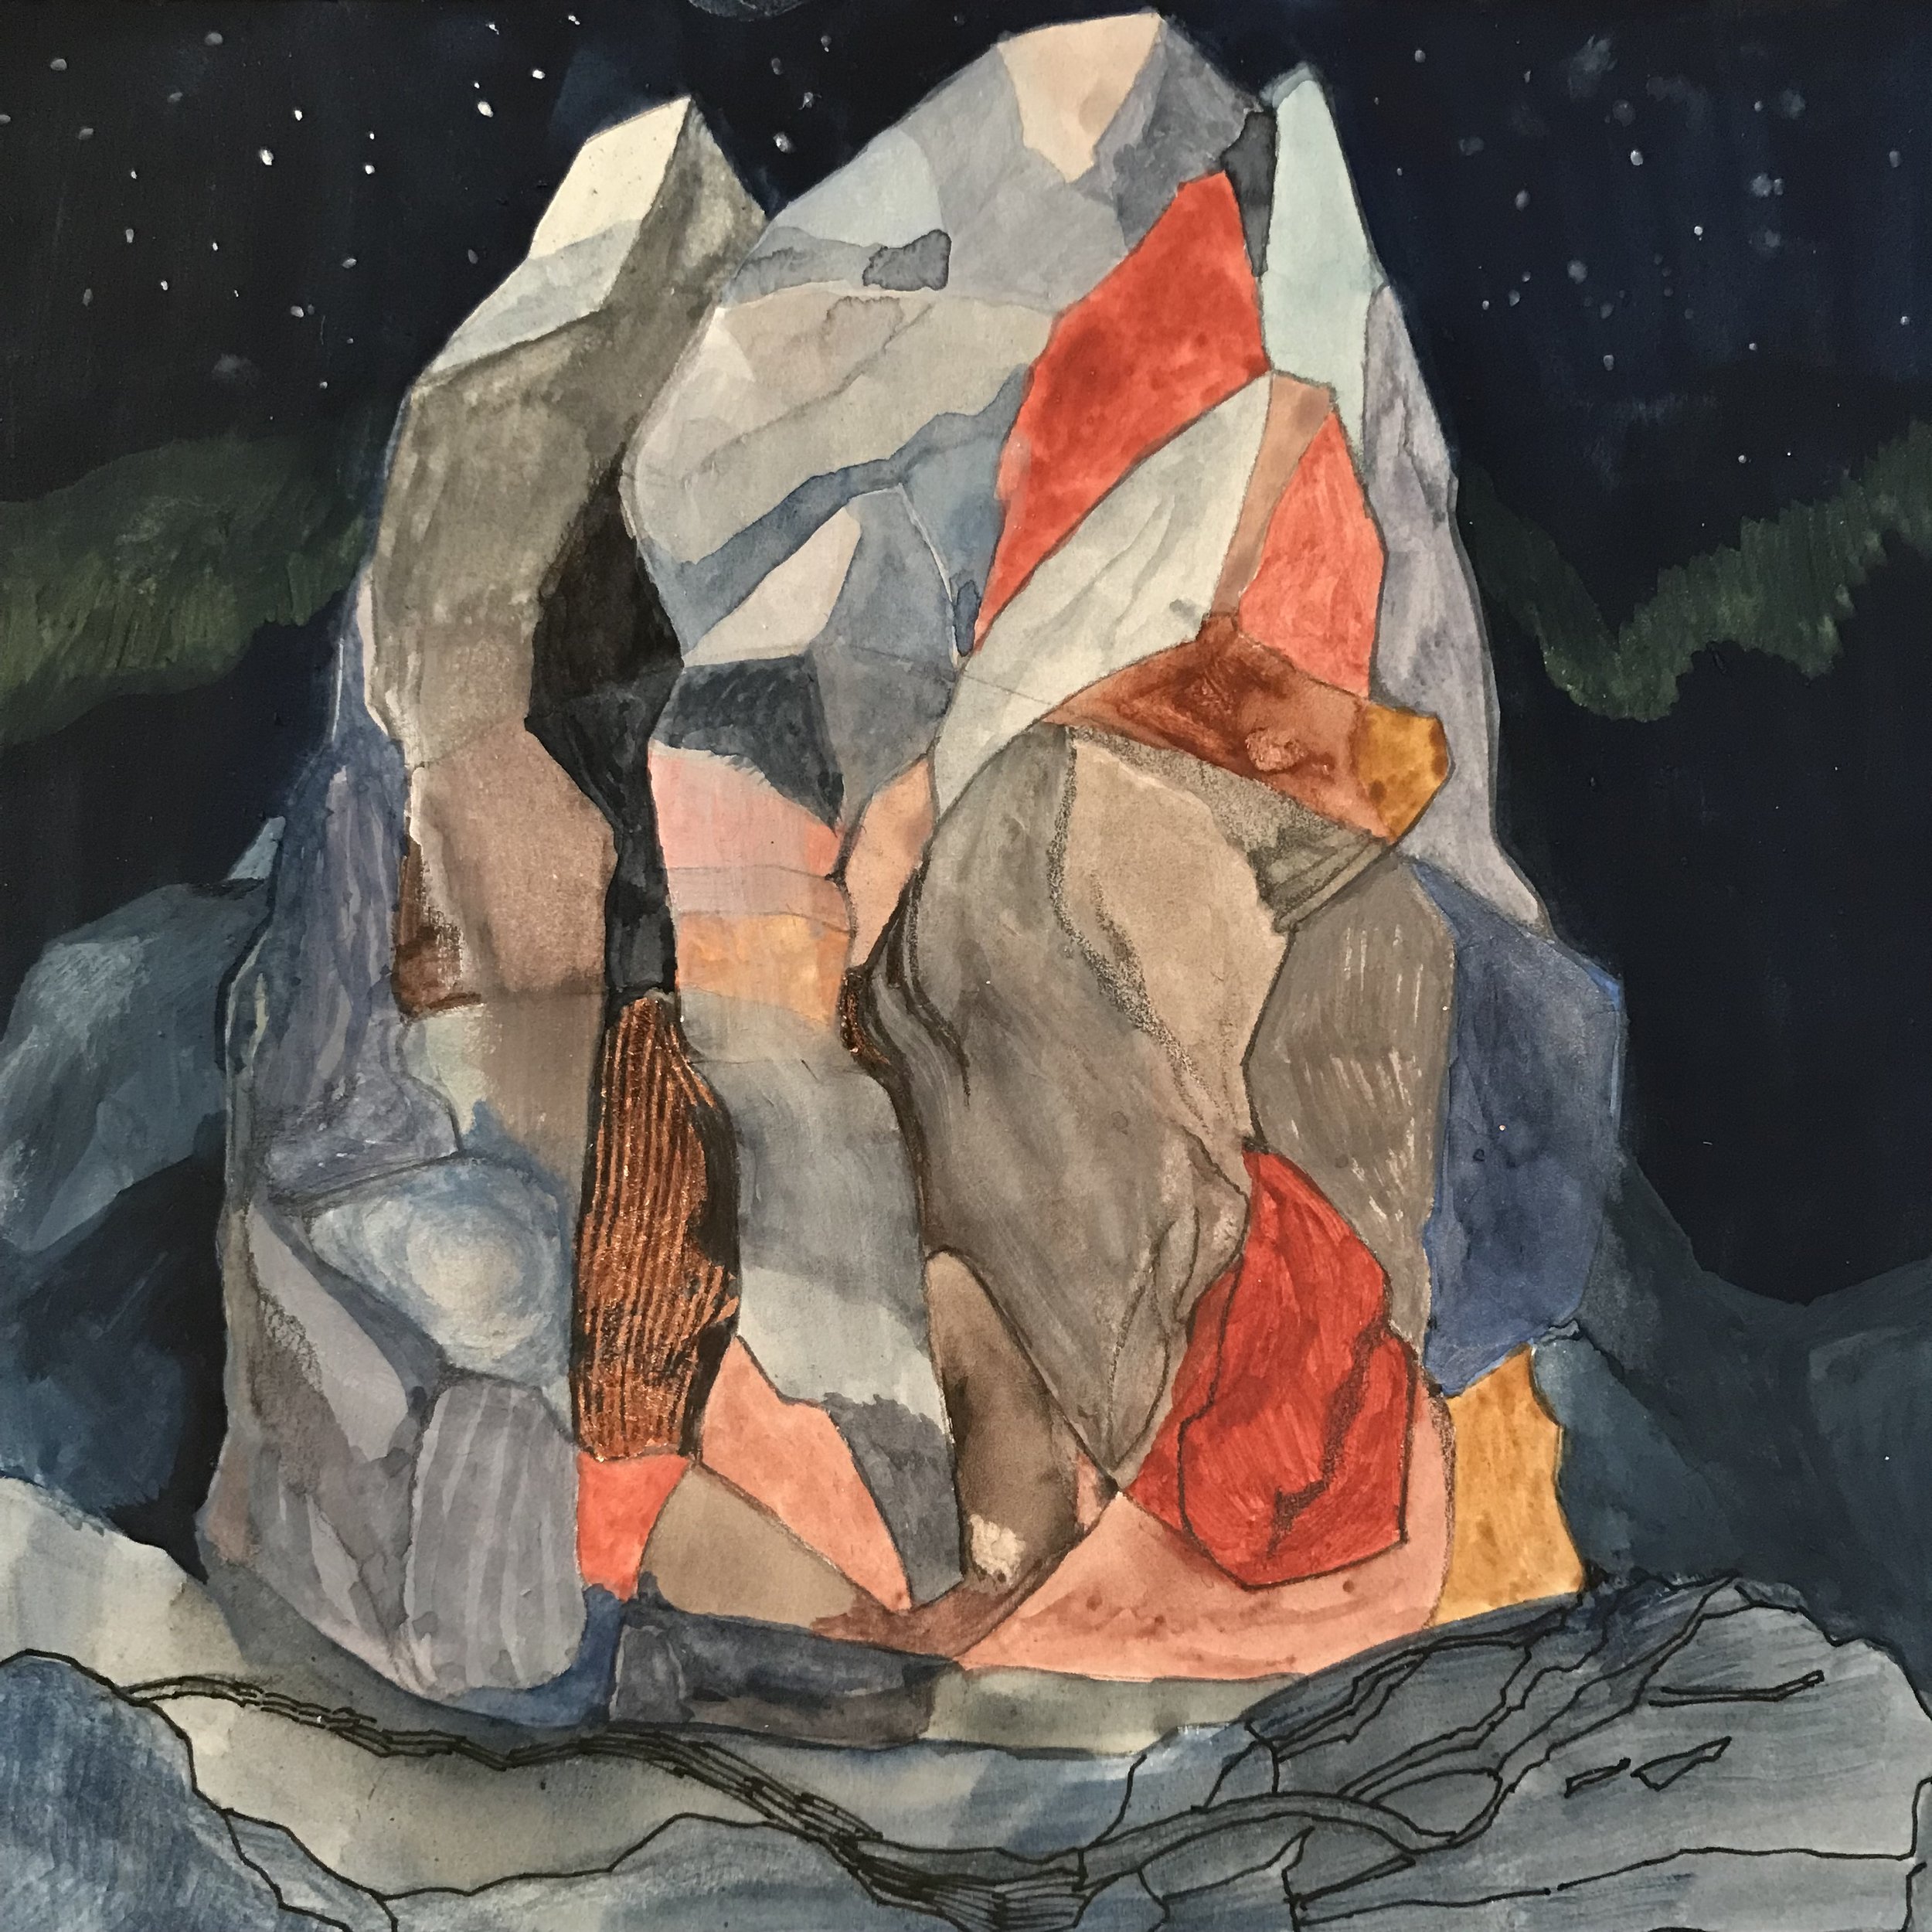 "Night Mountain" by Kathline Carr